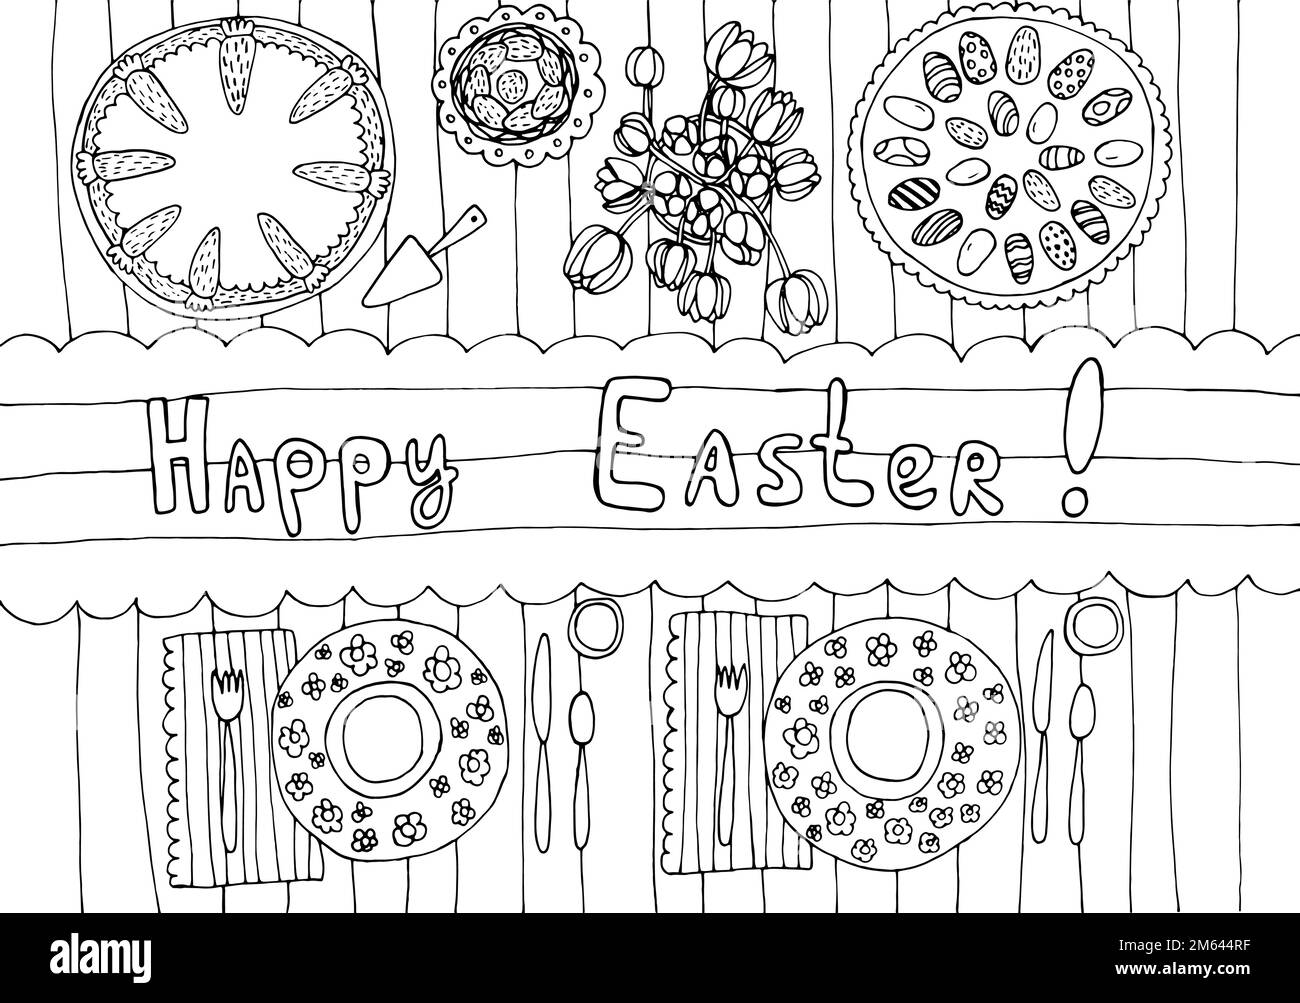 Easter dinner table coloring page Stock Vector